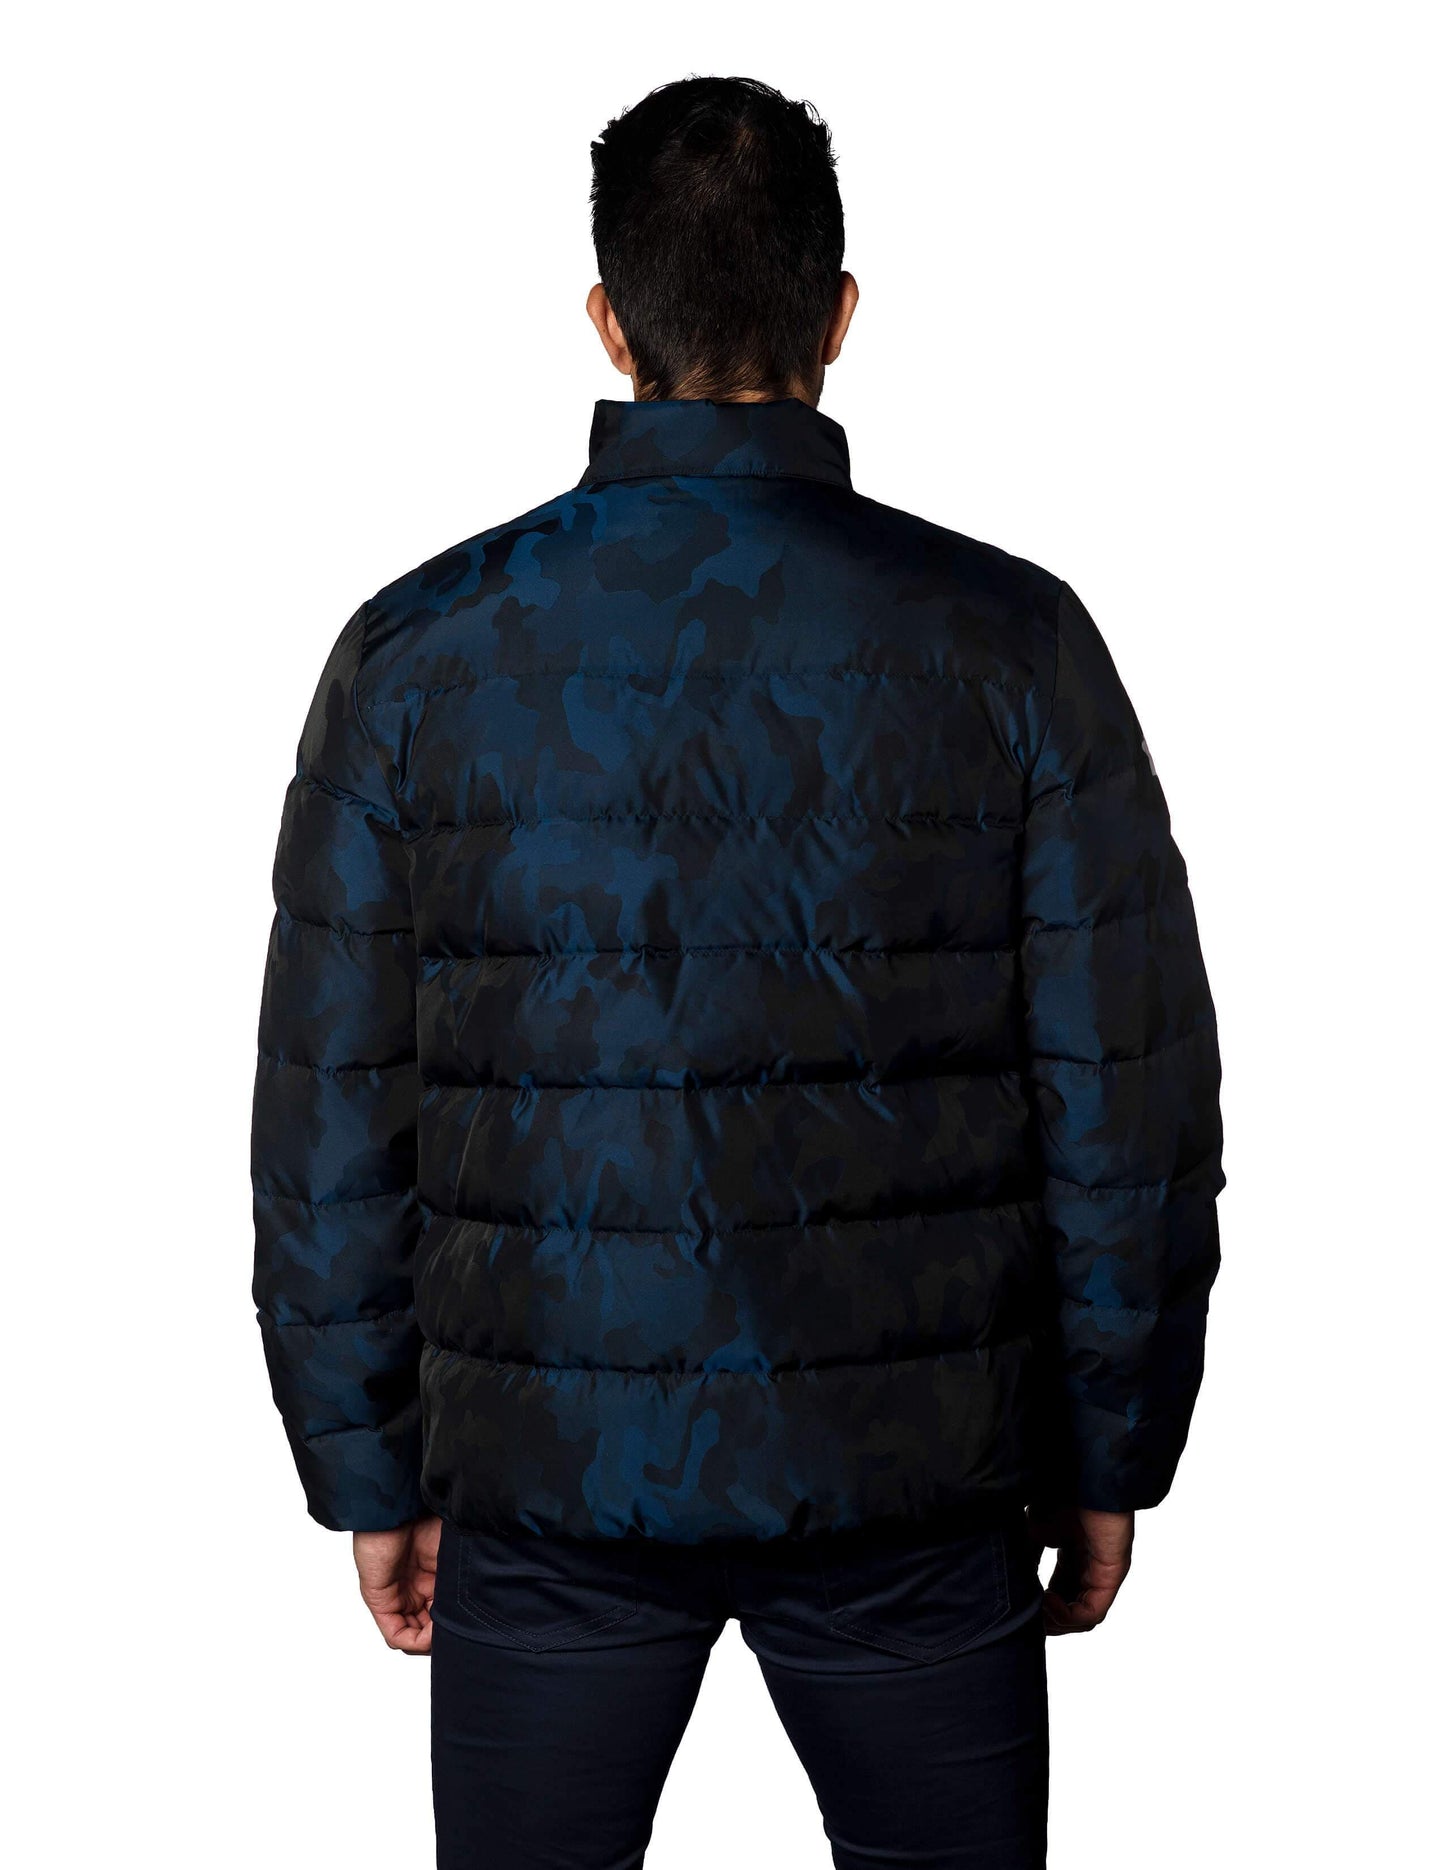 Navy Camouflage Jacquard Quilted Down Jacket Geneva 2C - Front Zipped - Jared Lang